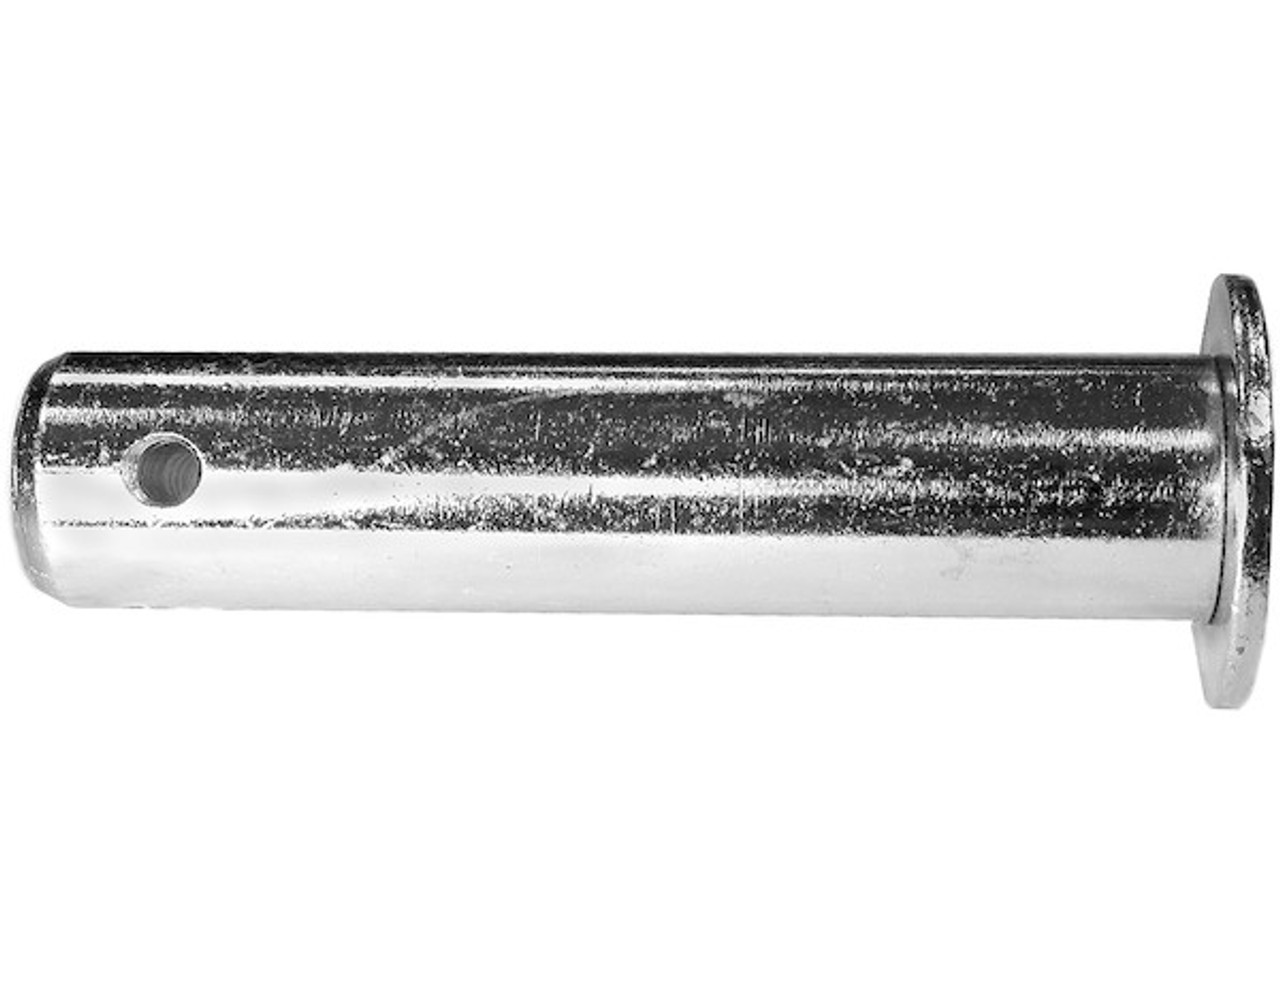 1302370 - SAM Pin 1-1/4 x 5-1/2 Inch-Replaces Fisher #5142